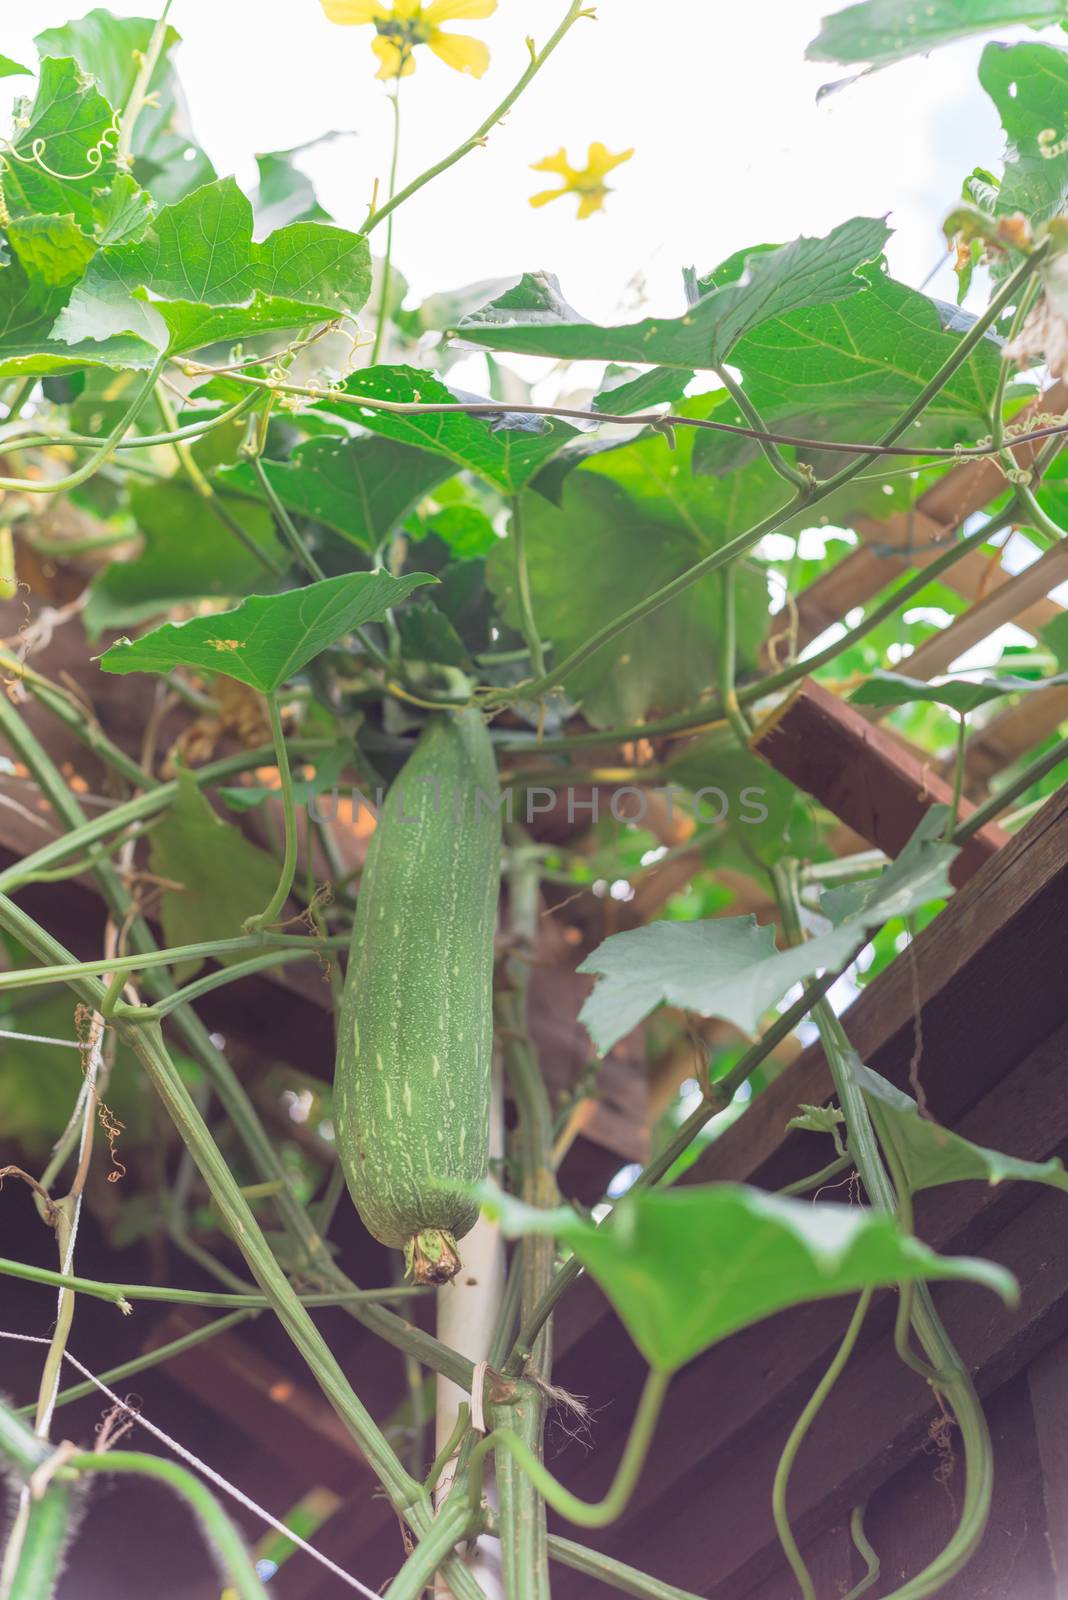 Lookup view of hanging Luffa Sponge gourd tropical fruit hanging on bamboo trellis and pergola. Natural pollinator on yellow blooming flower at organic backyard garden near Dallas, Texas, USA